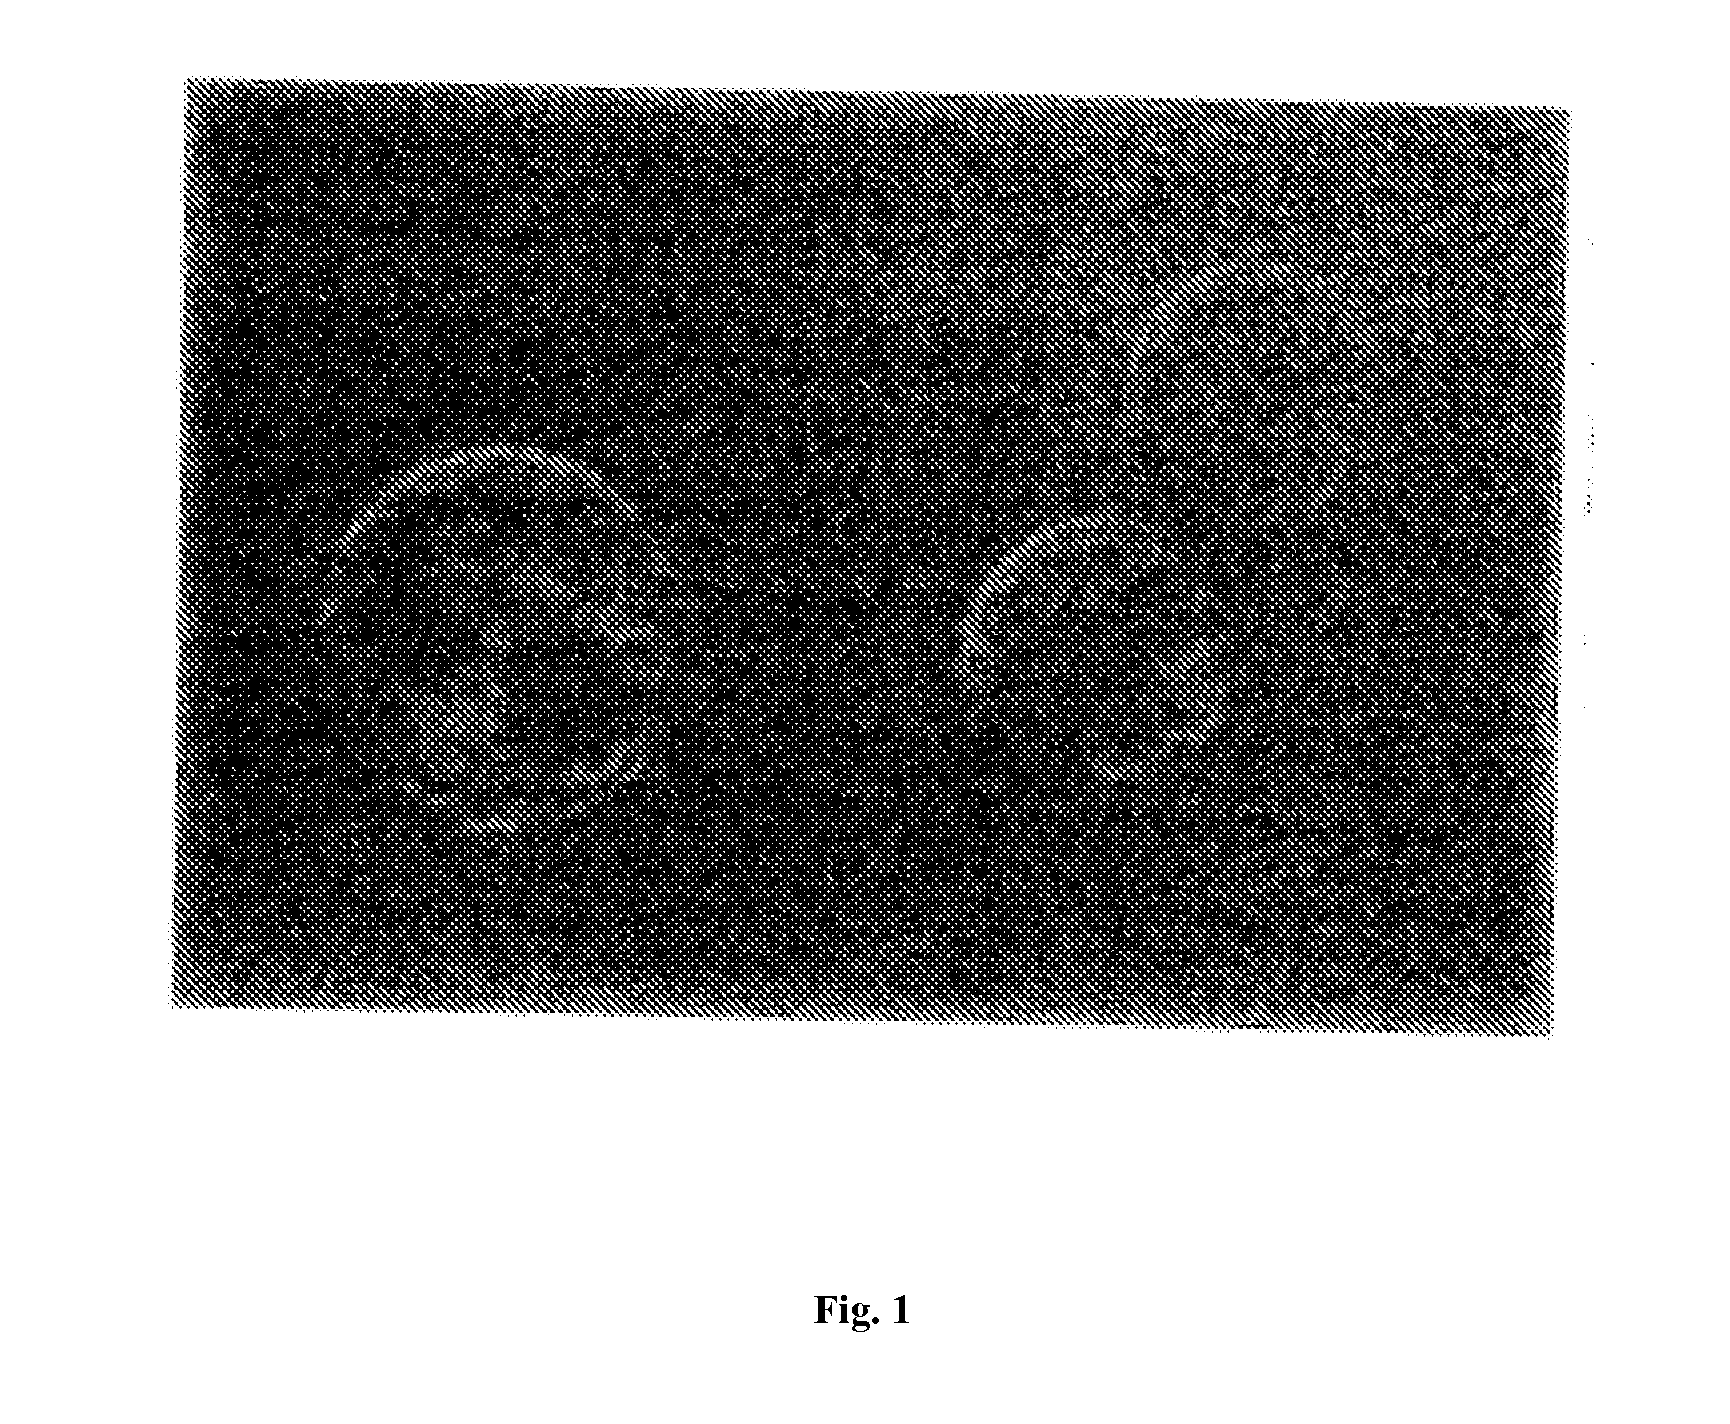 Bank of stem cells for producing cells for transplantation having HLA antigens matching those of transplant recipients, and methods for making and using such a stem cell bank